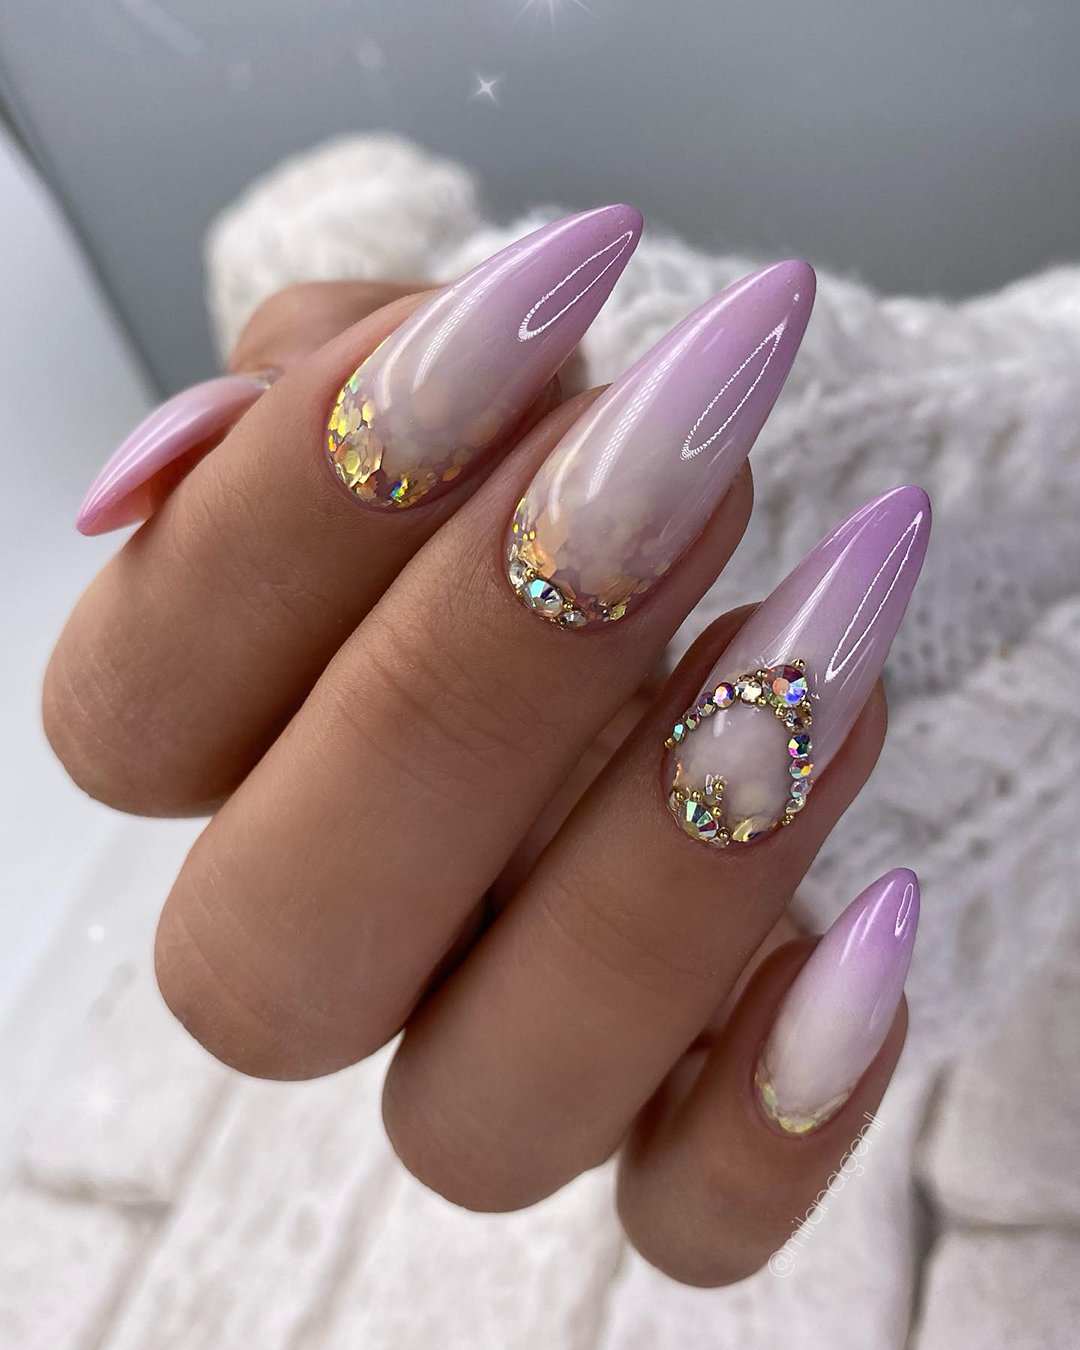 pink and white nails for wedding ombre with glitter milana.gen11